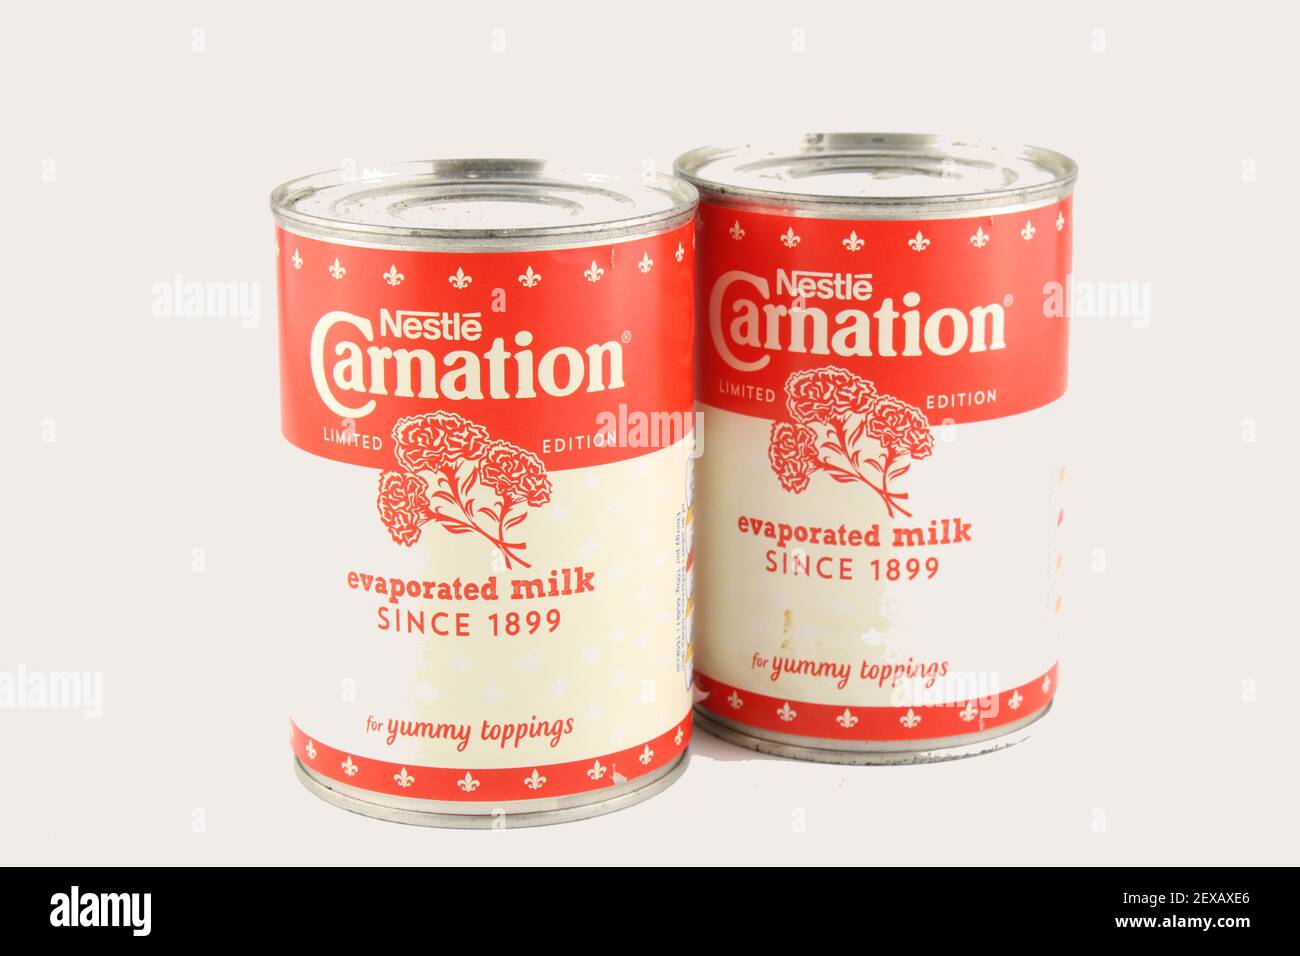 Two tins of Nestle Carnation evaporated milk with limited edition labels, isolated with copy space Stock Photo